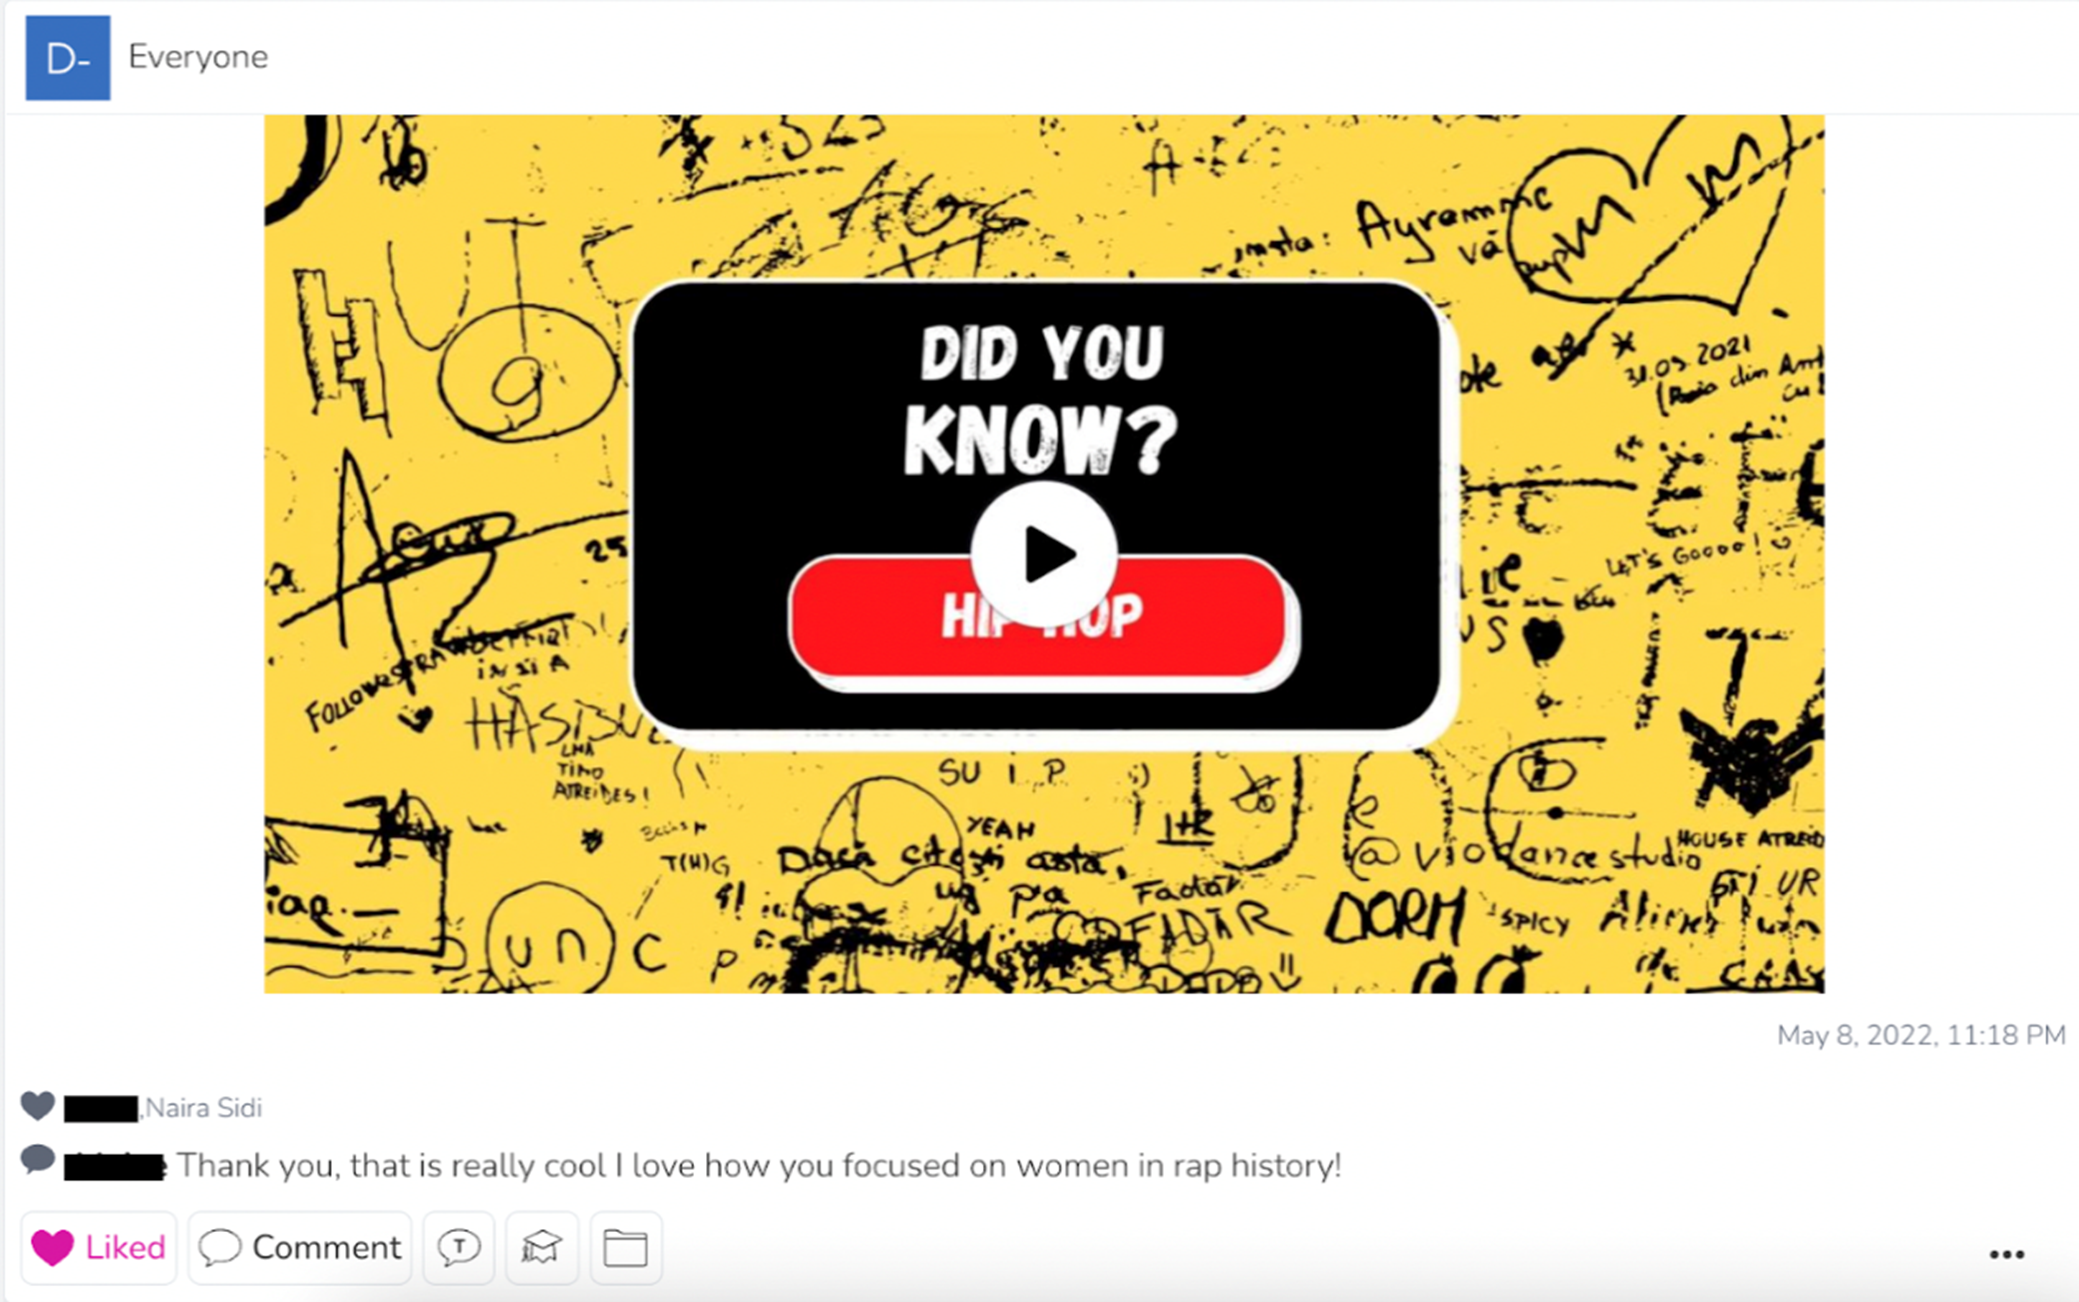 College mentors created “Did You Know” videos to showcase the culture and history of Hip Hop. Seesaw allowed the middle school students to engage back in a style that mimicked social media platforms.